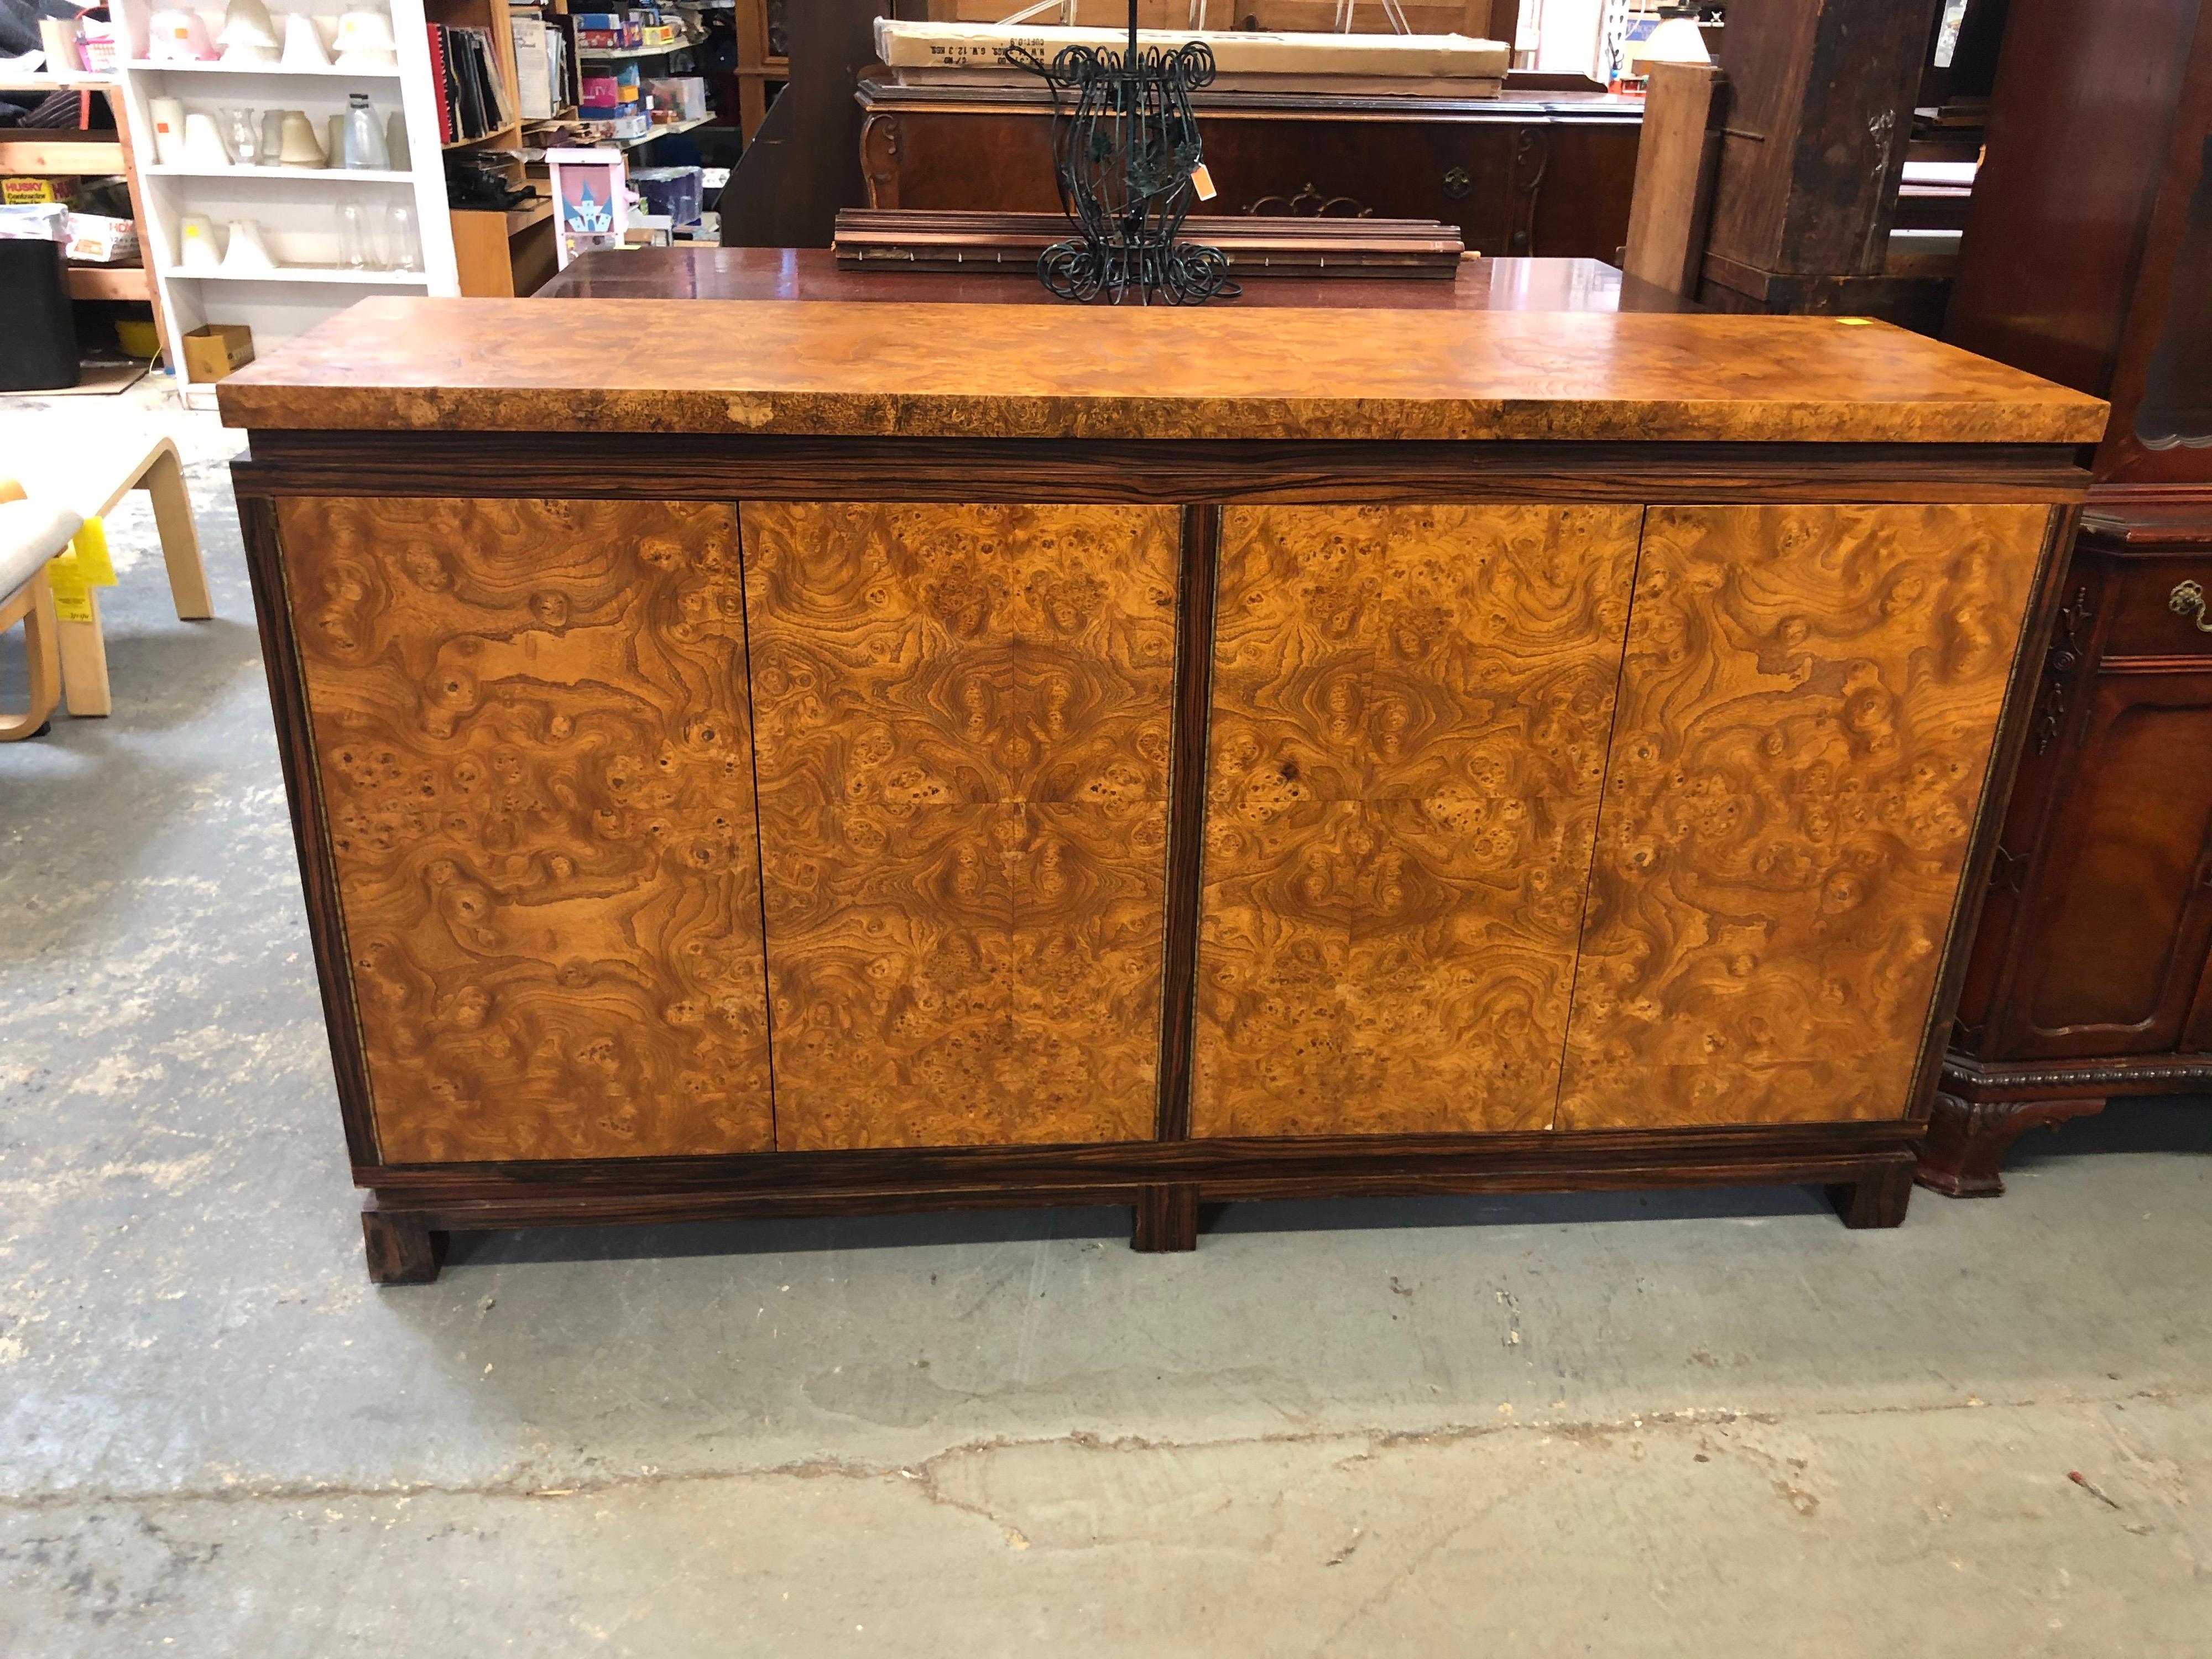 Vintage burlwood credenza with rosewood trim. Elegant Art Deco style piece with great storage. Sophisticated and timeless piece for entertaining. Magnetic doors give off a clean frontal appearance. Simply push to open which reveals adjustable